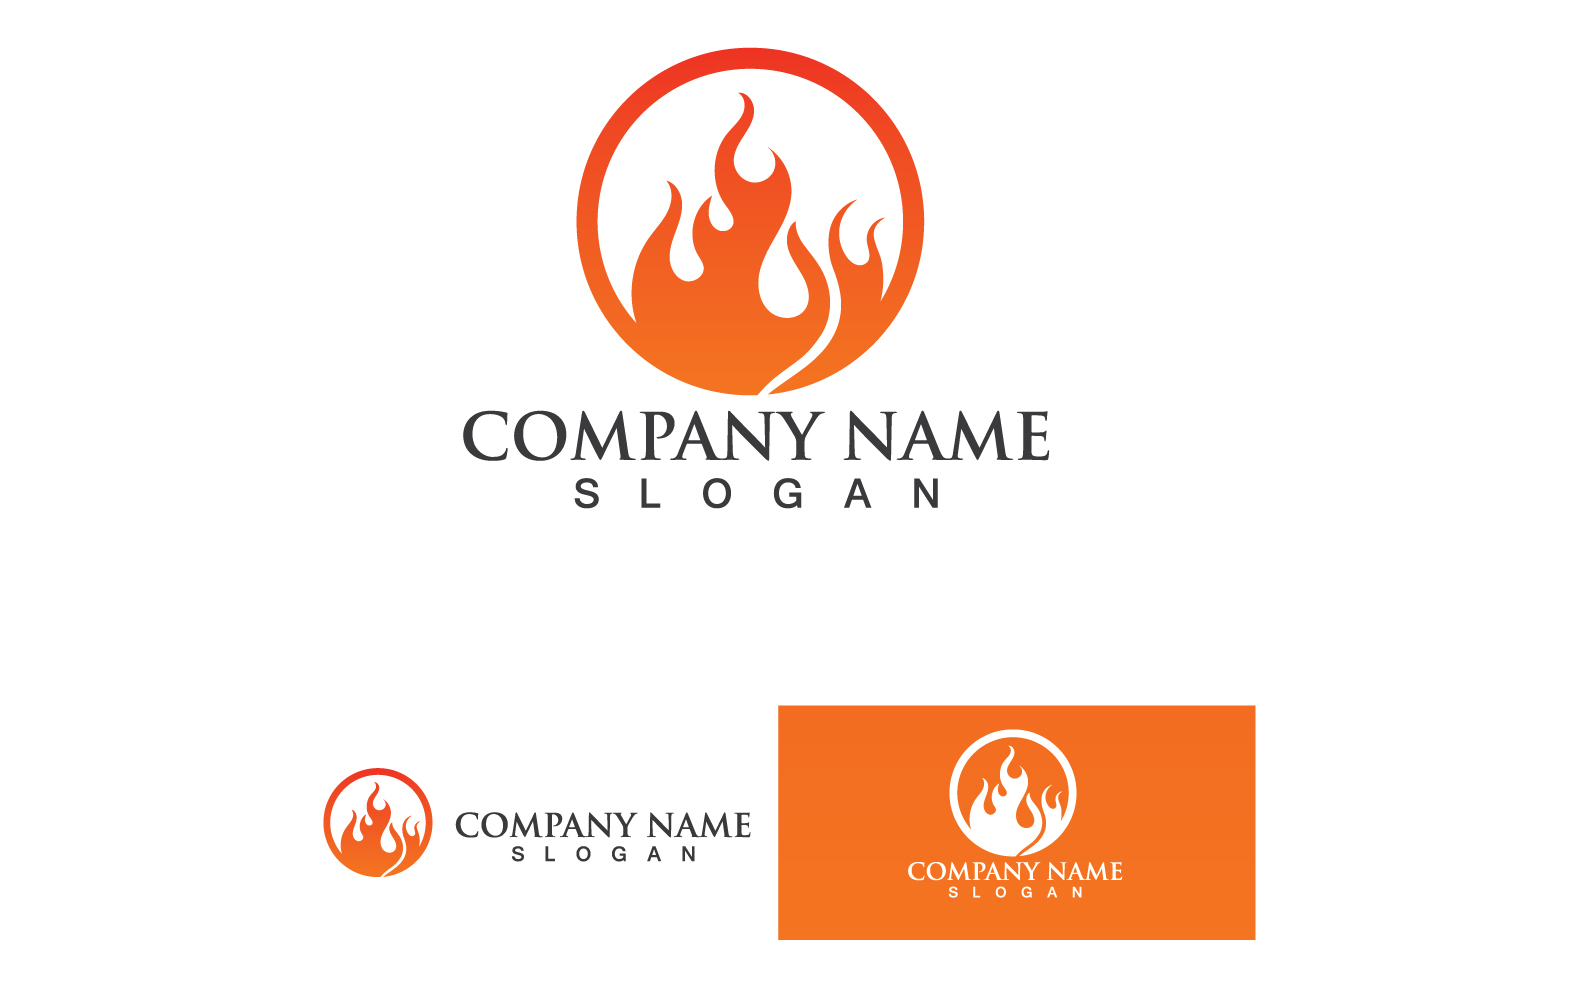 Wing Bird Business Logo Your Company Name V53